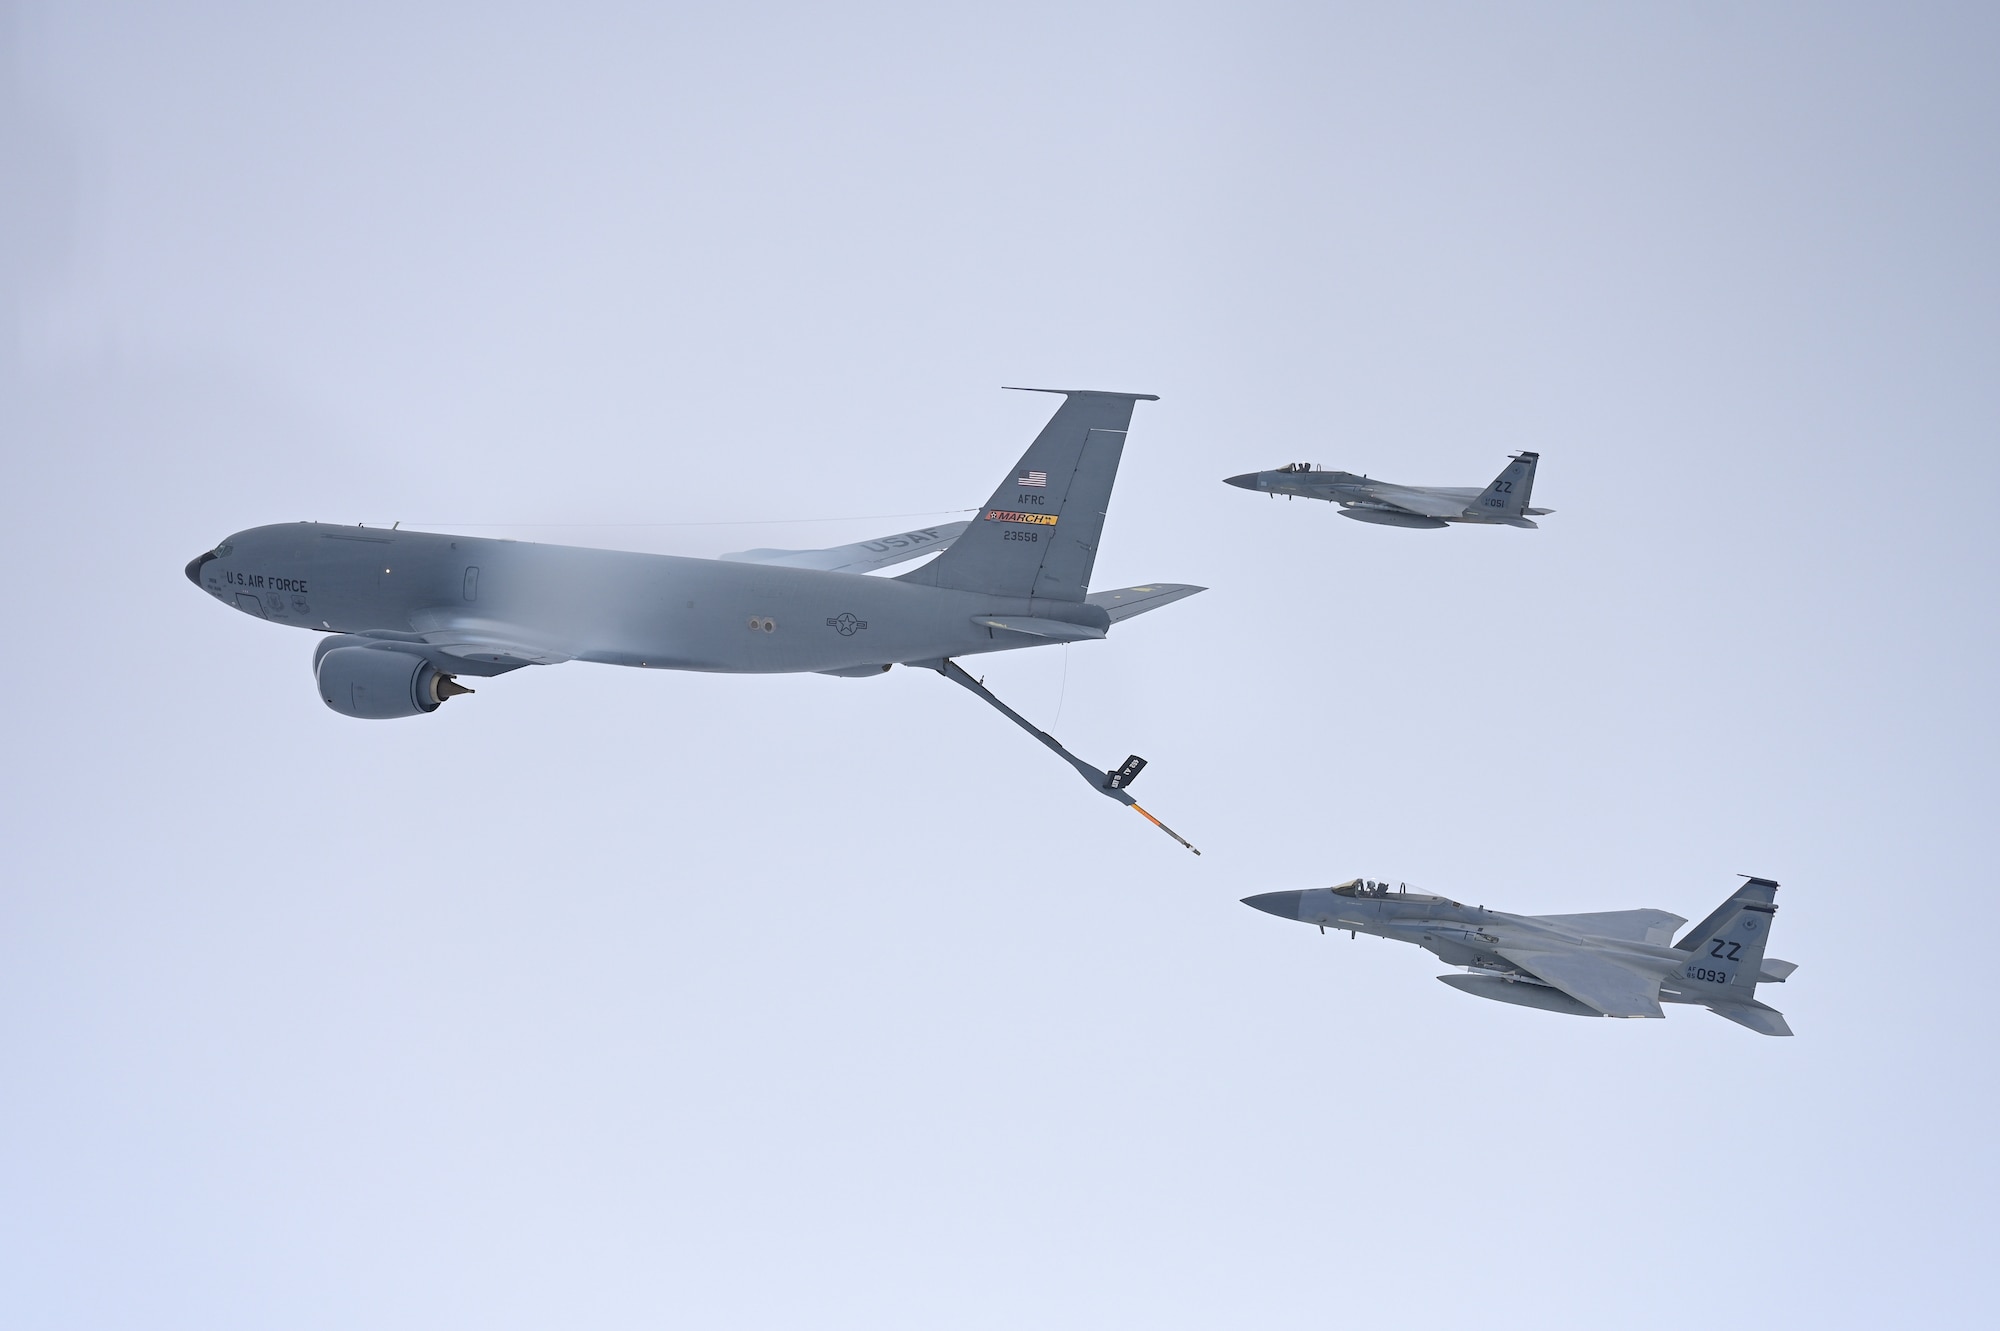 Photo of a U.S. Air Force KC-135 Stratotanker refueling two F-15 Eagles.